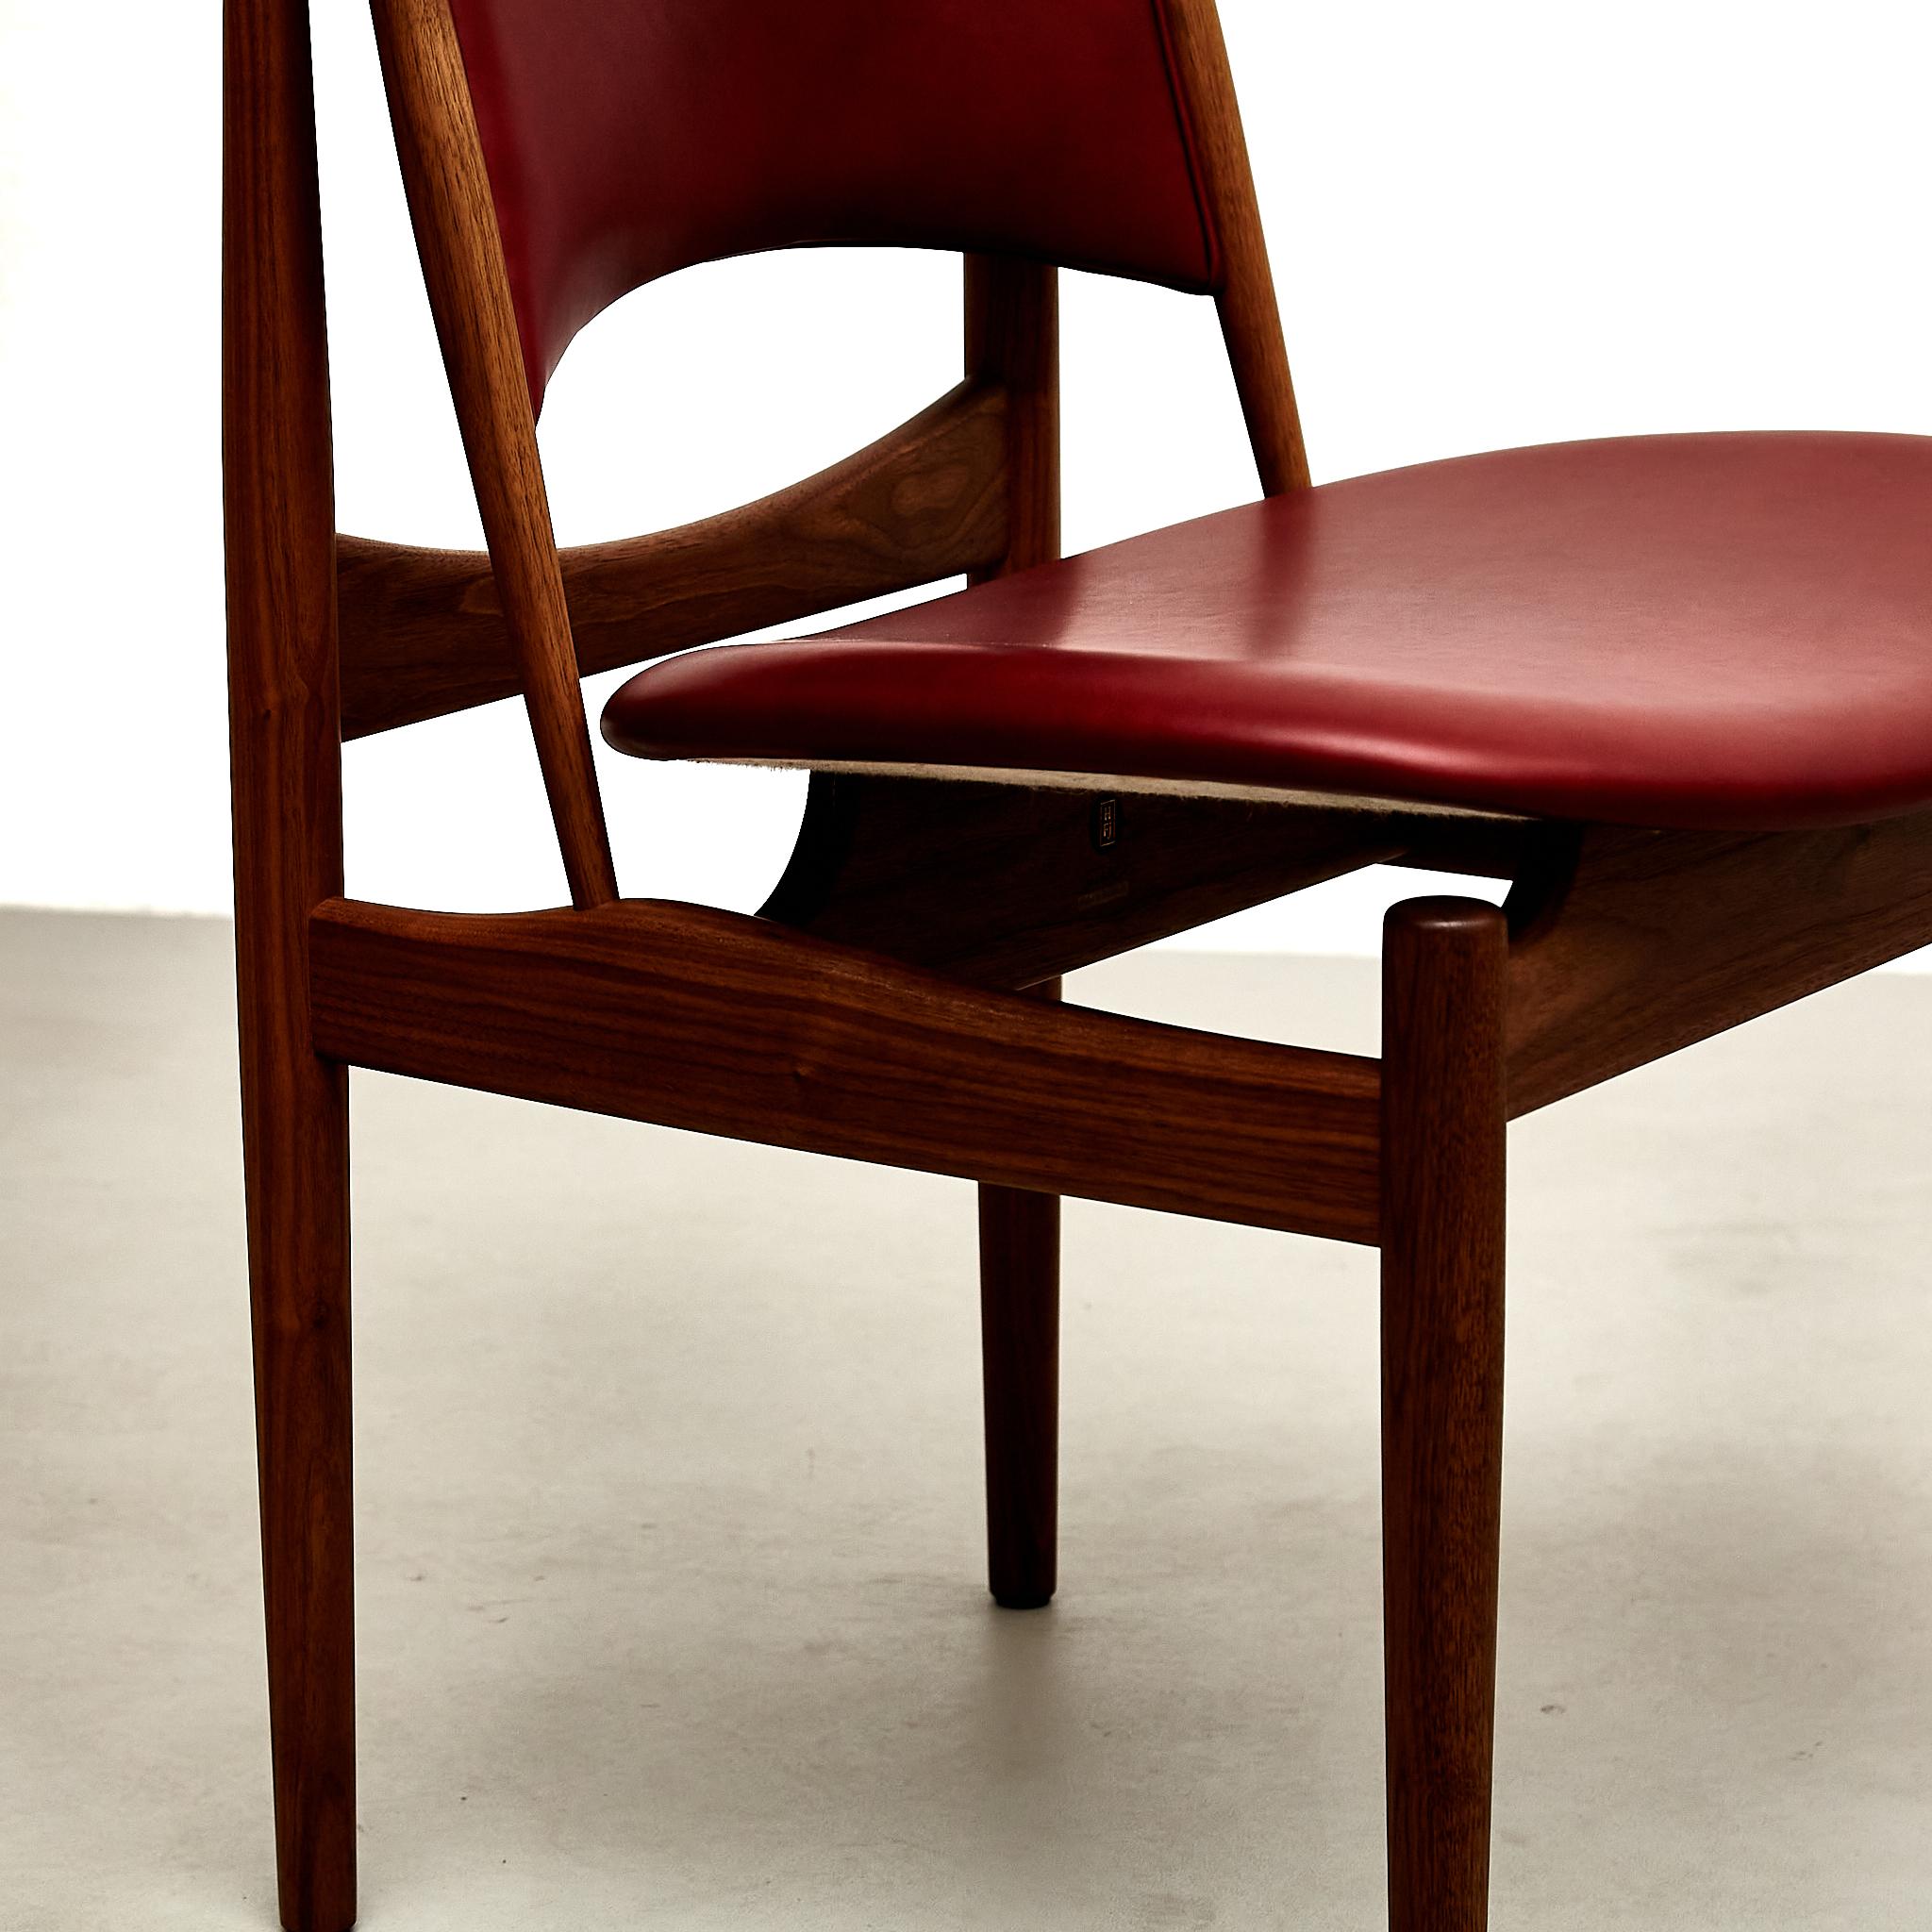 Finn Juhl Egyptian Chair in Walnut Wood and Dark Red Leather For Sale 7